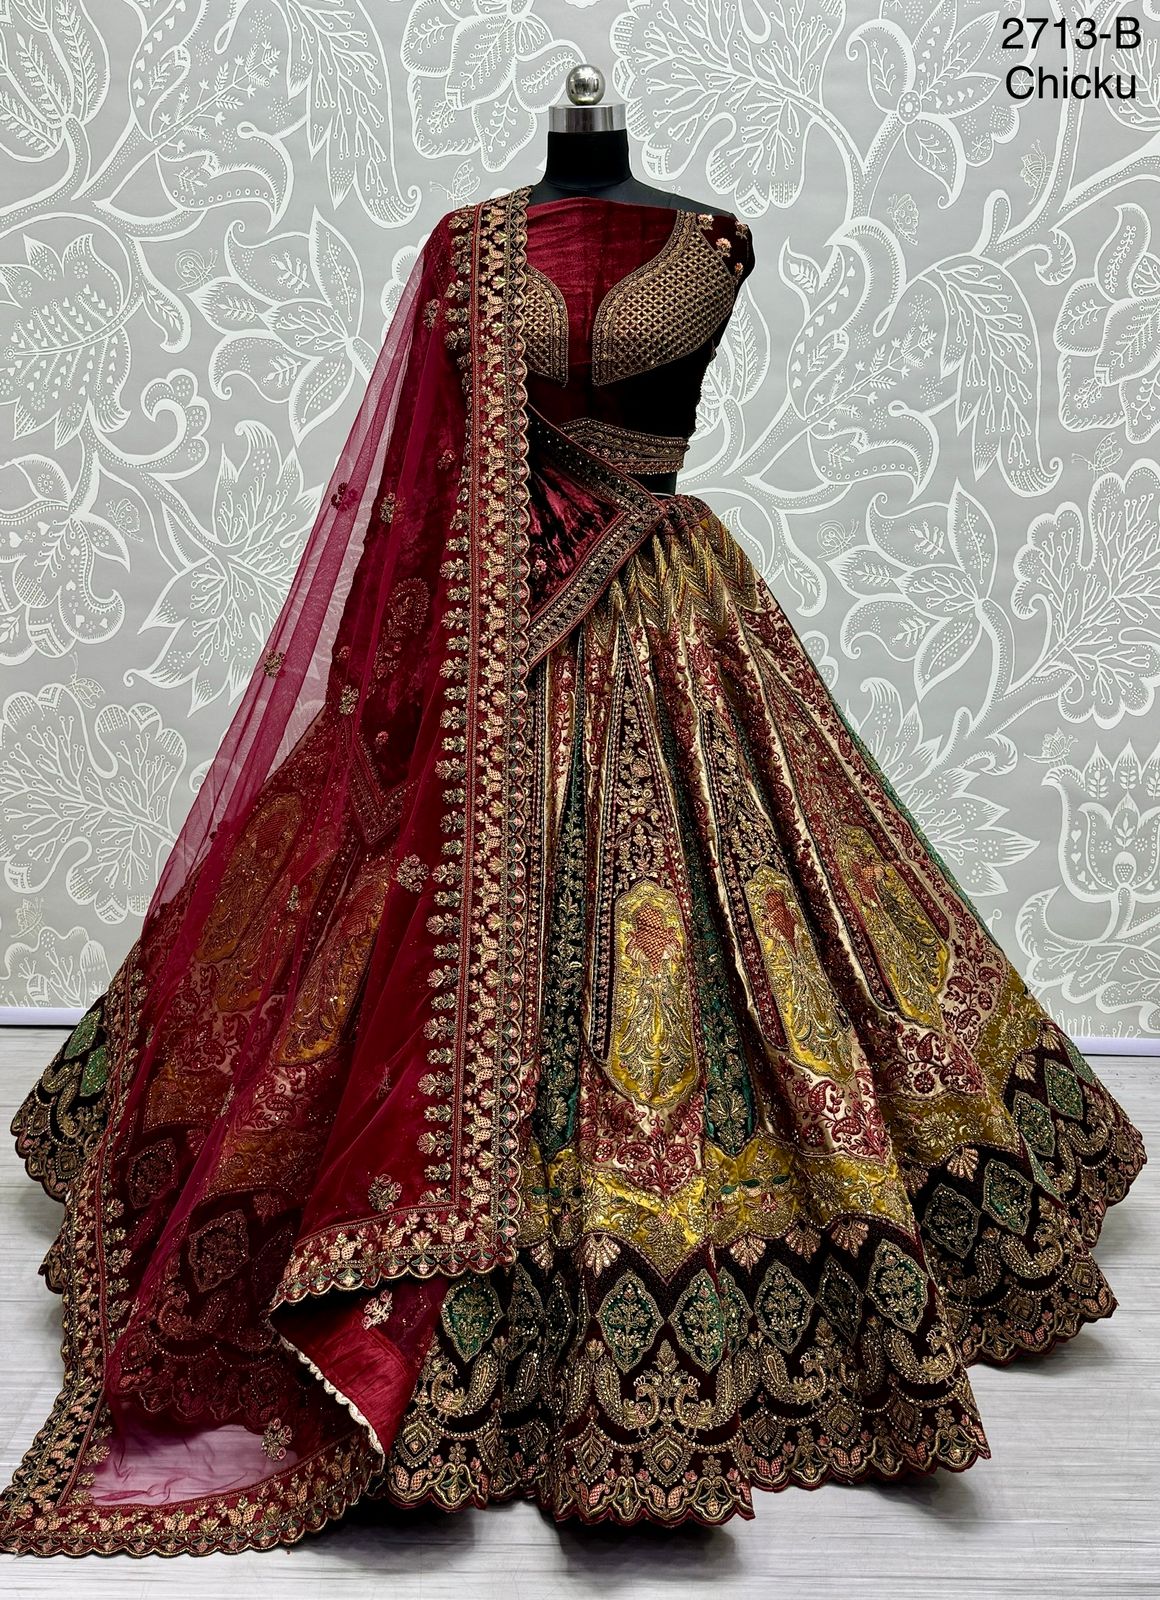 New heavy velvet patchwork attached with Dori Embroidered, Multi thread, and diamond work designer bridal Lehenga choli for online sale